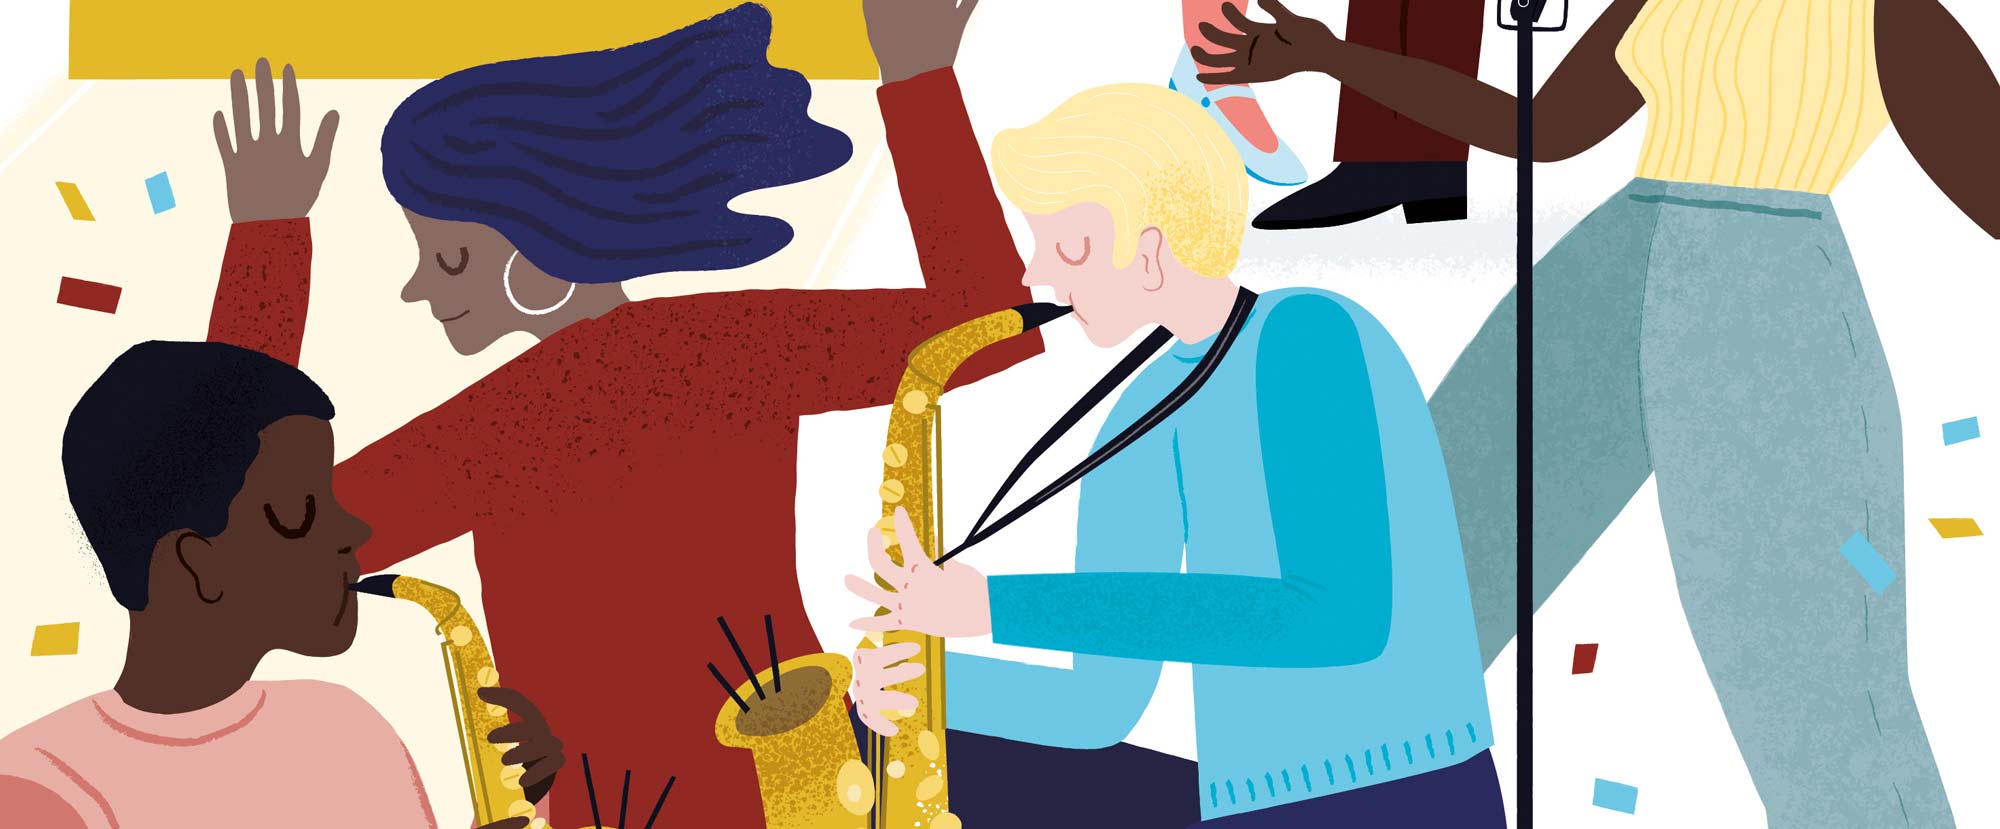 From a poster for Ronnie Scott's Jazz Club by Elly Jahnz